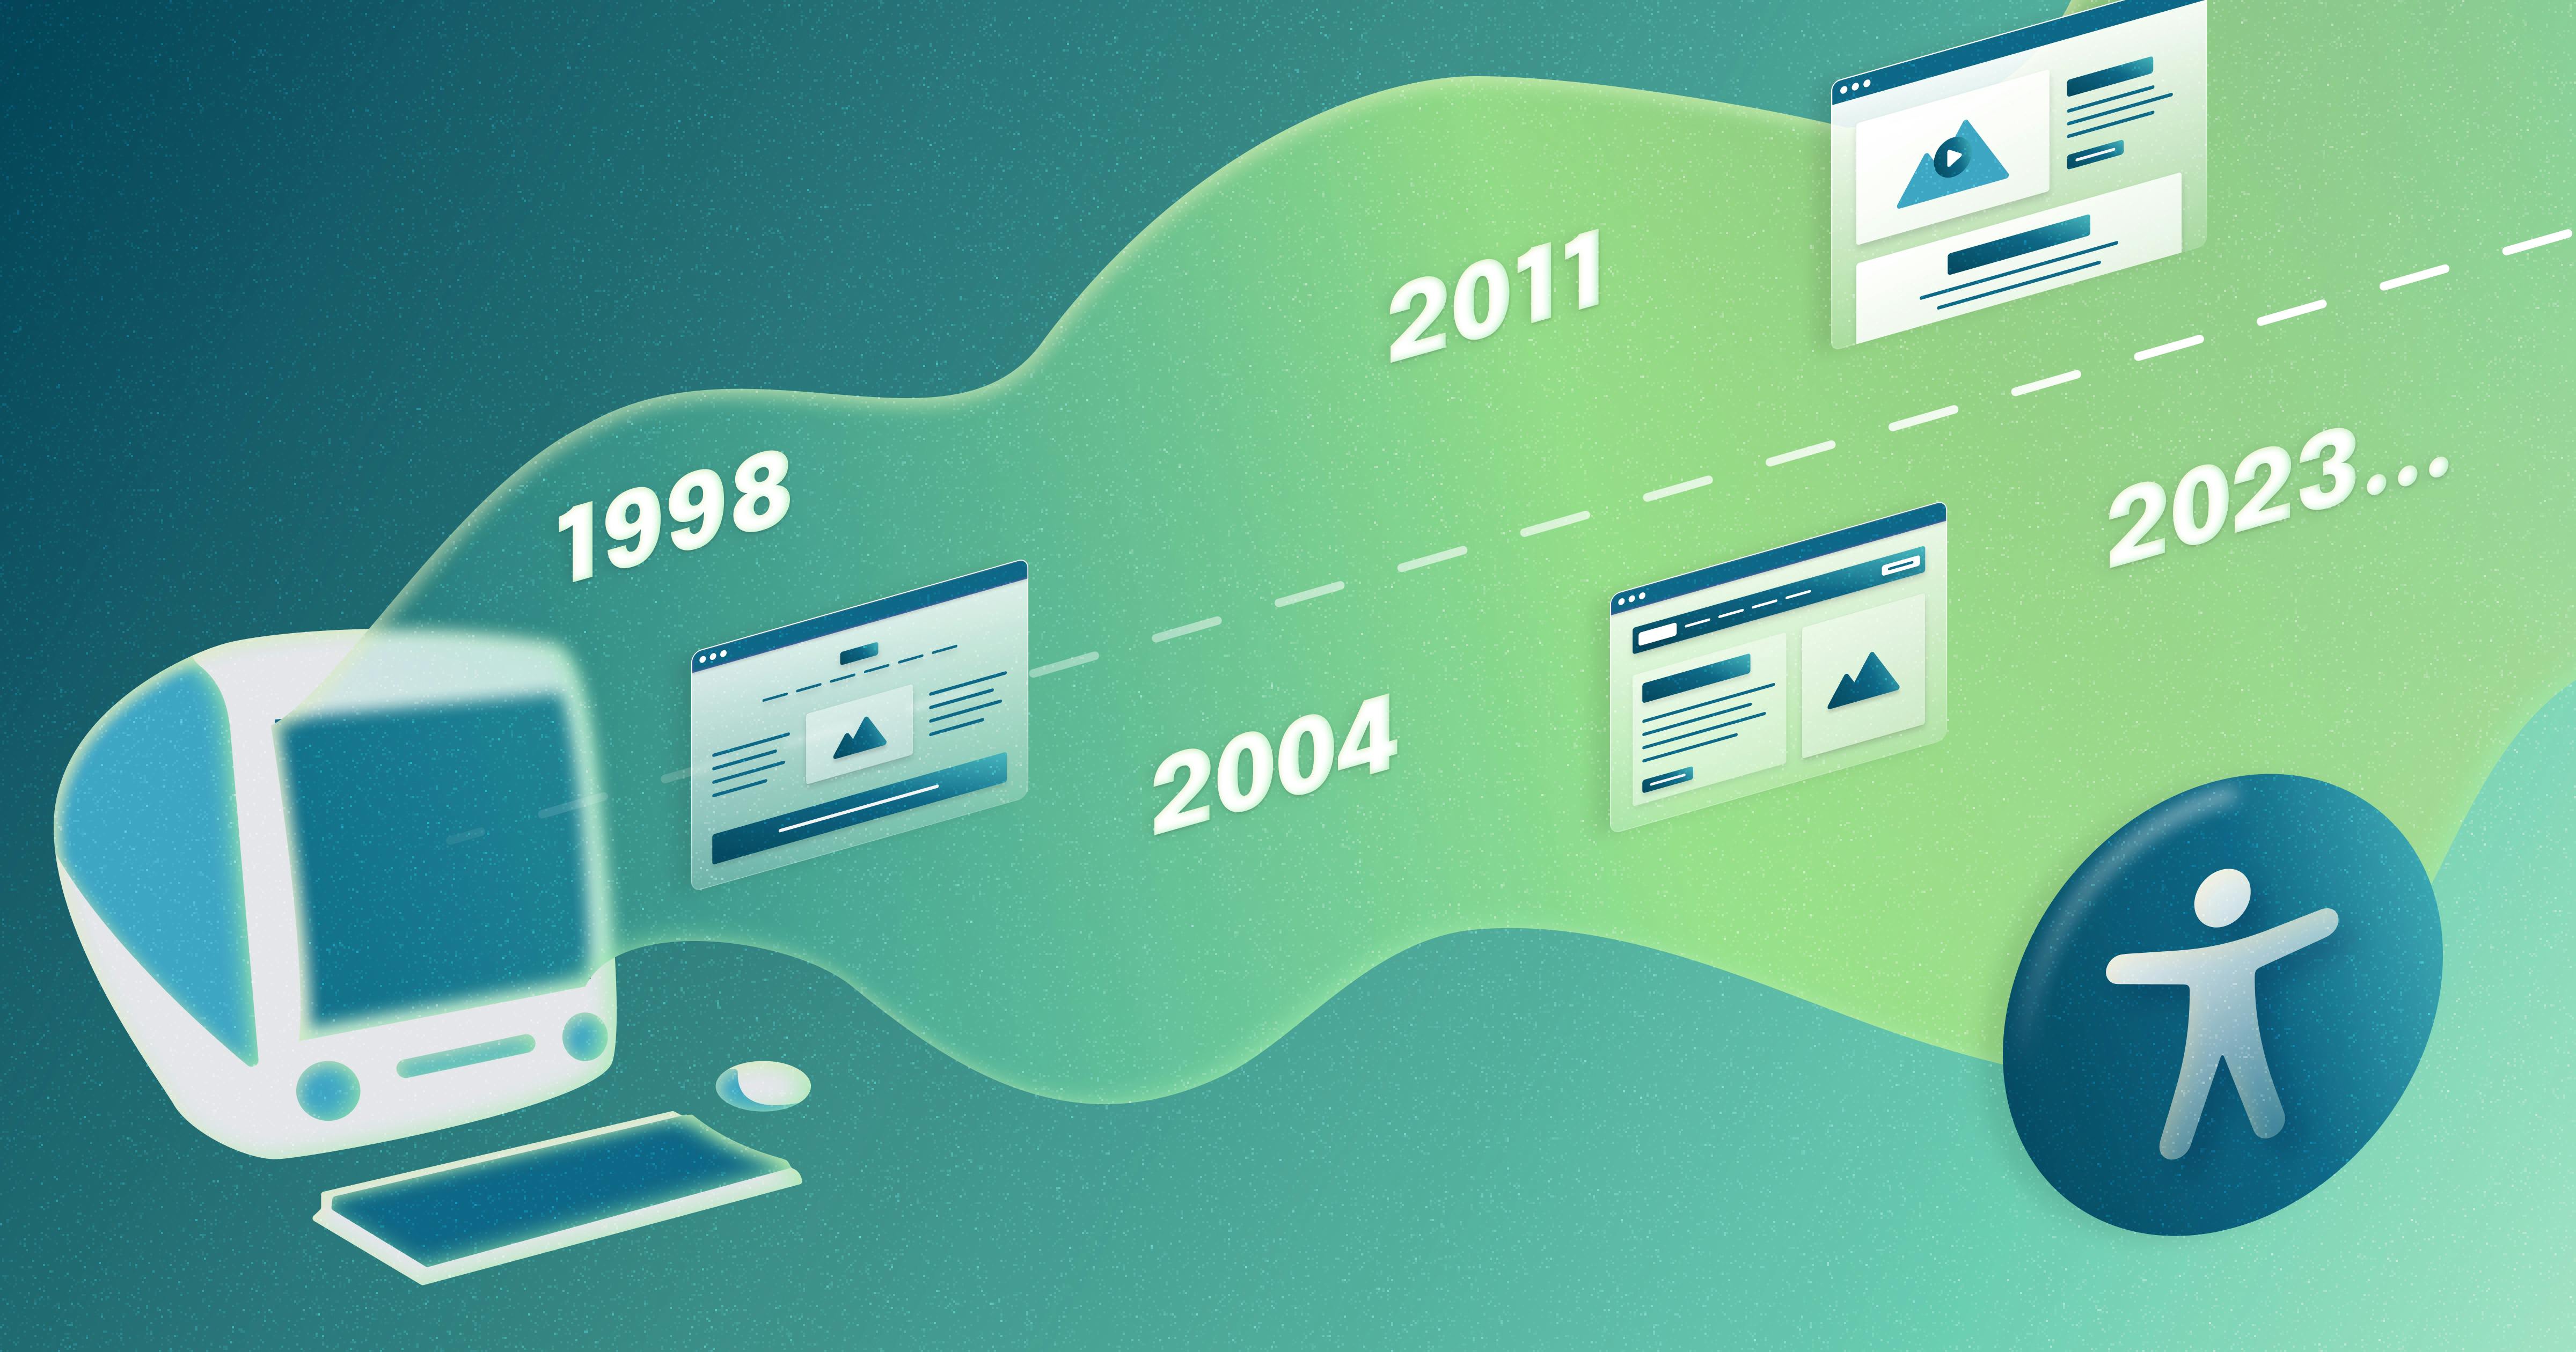 A timeline of digital accessibility from 1998 to 2023. An old Mac computer is at the start of the timeline and an accessibility symbol is at the end.